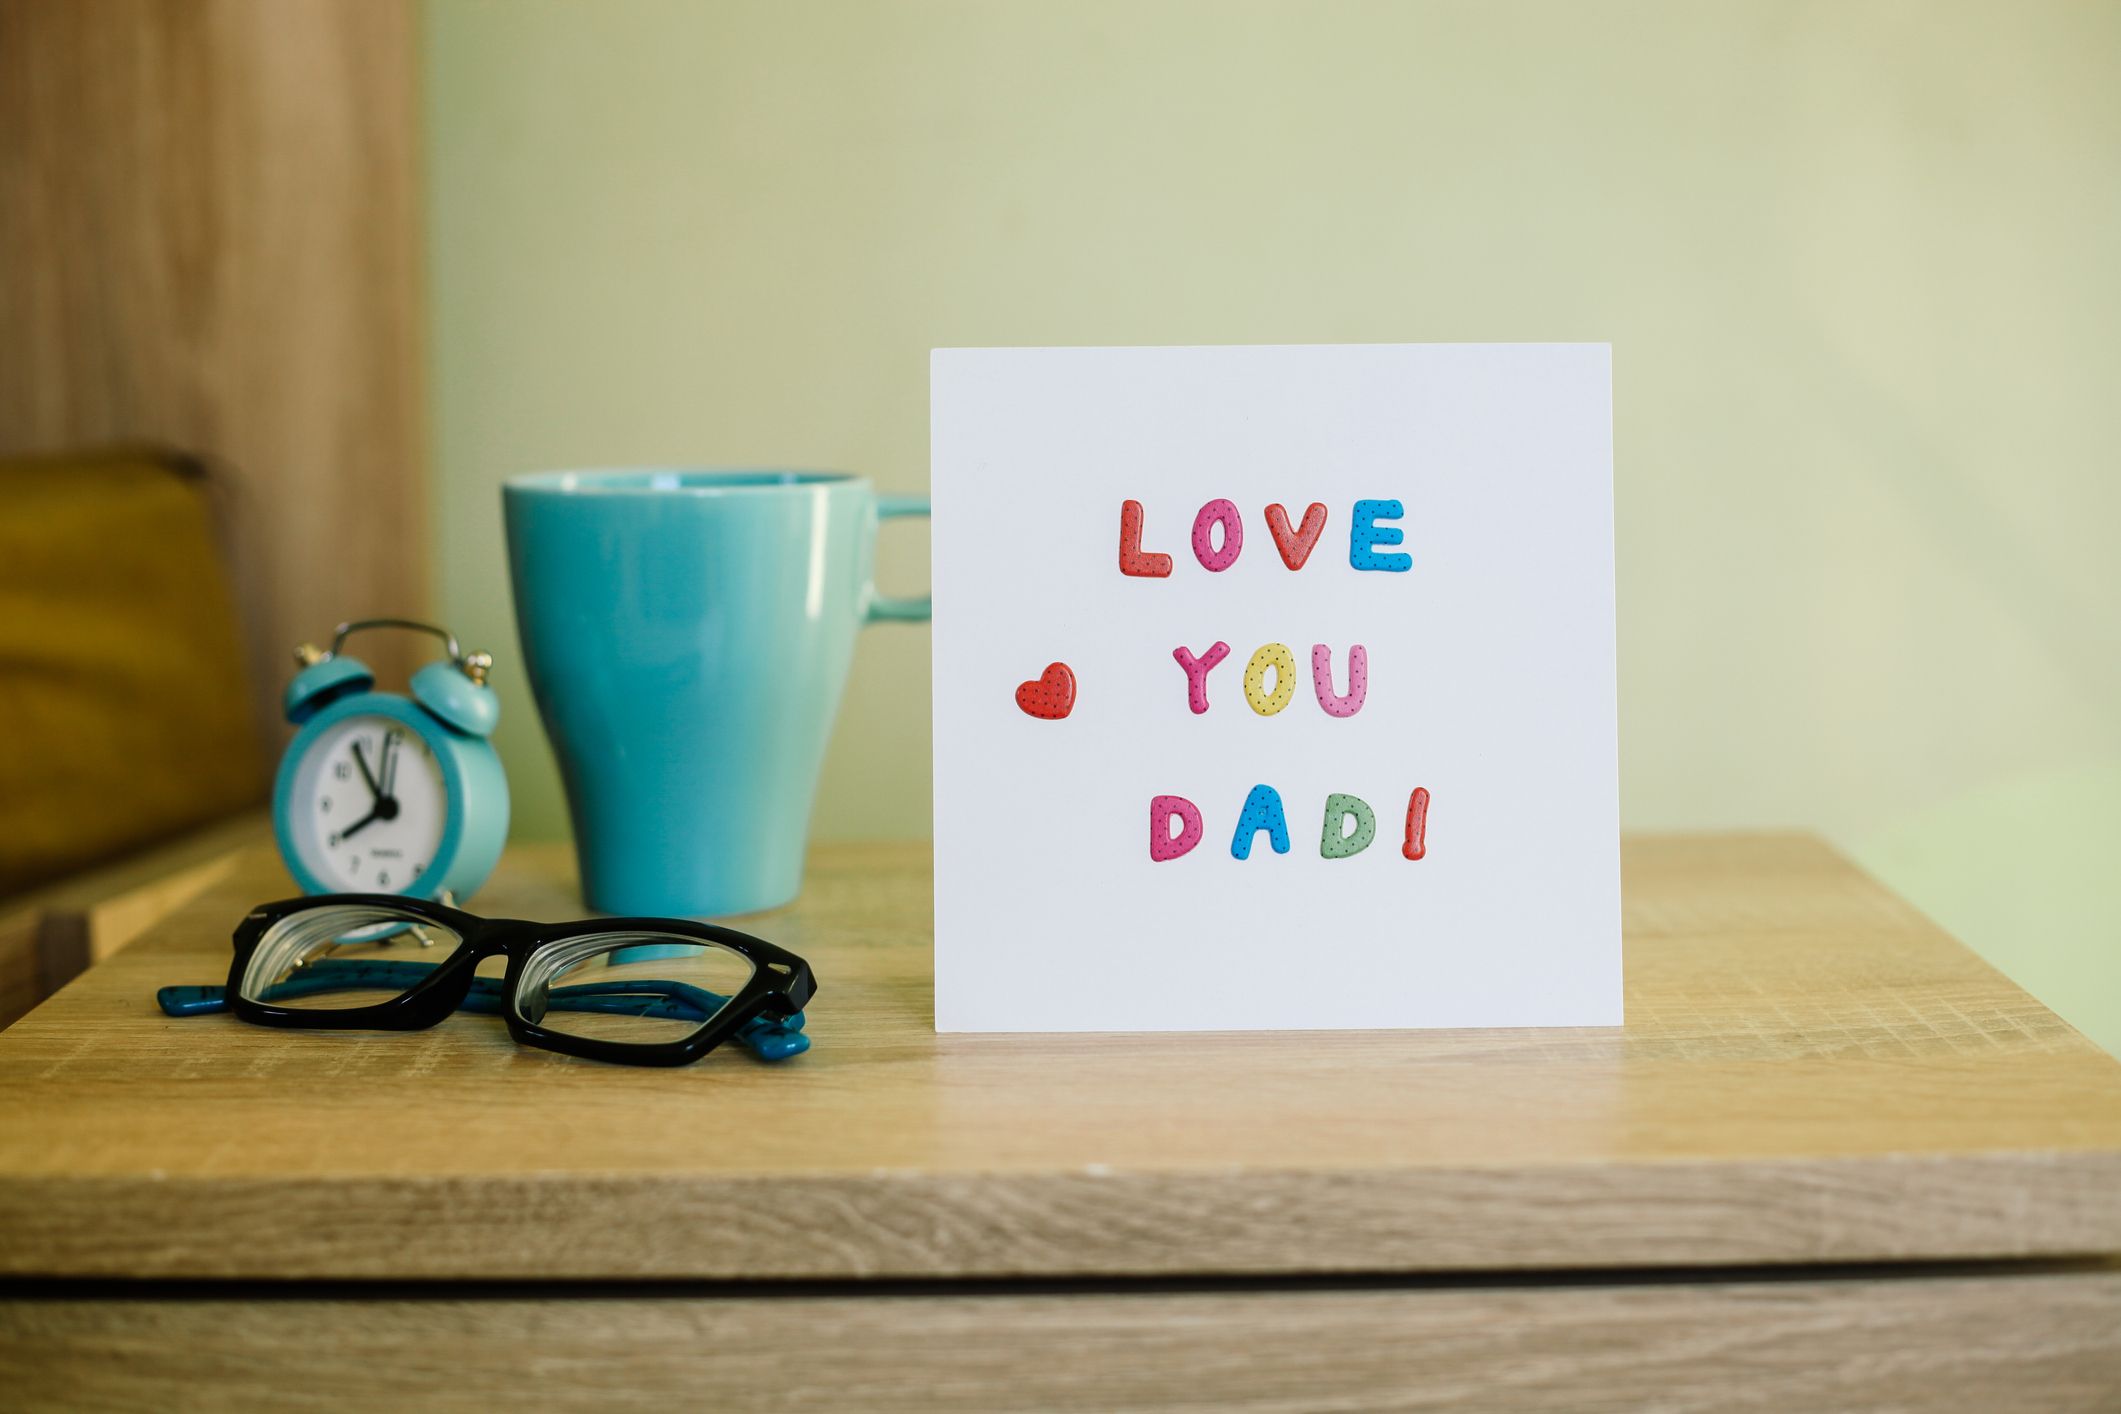 Best Fathers Day Gifts from Daughter Cool Birthday Present for Men Guys Fathers Day Gifts for Dad Kids Unique Gag Gift Idea for Him from Daughter Best Dad Ever Wife Son 